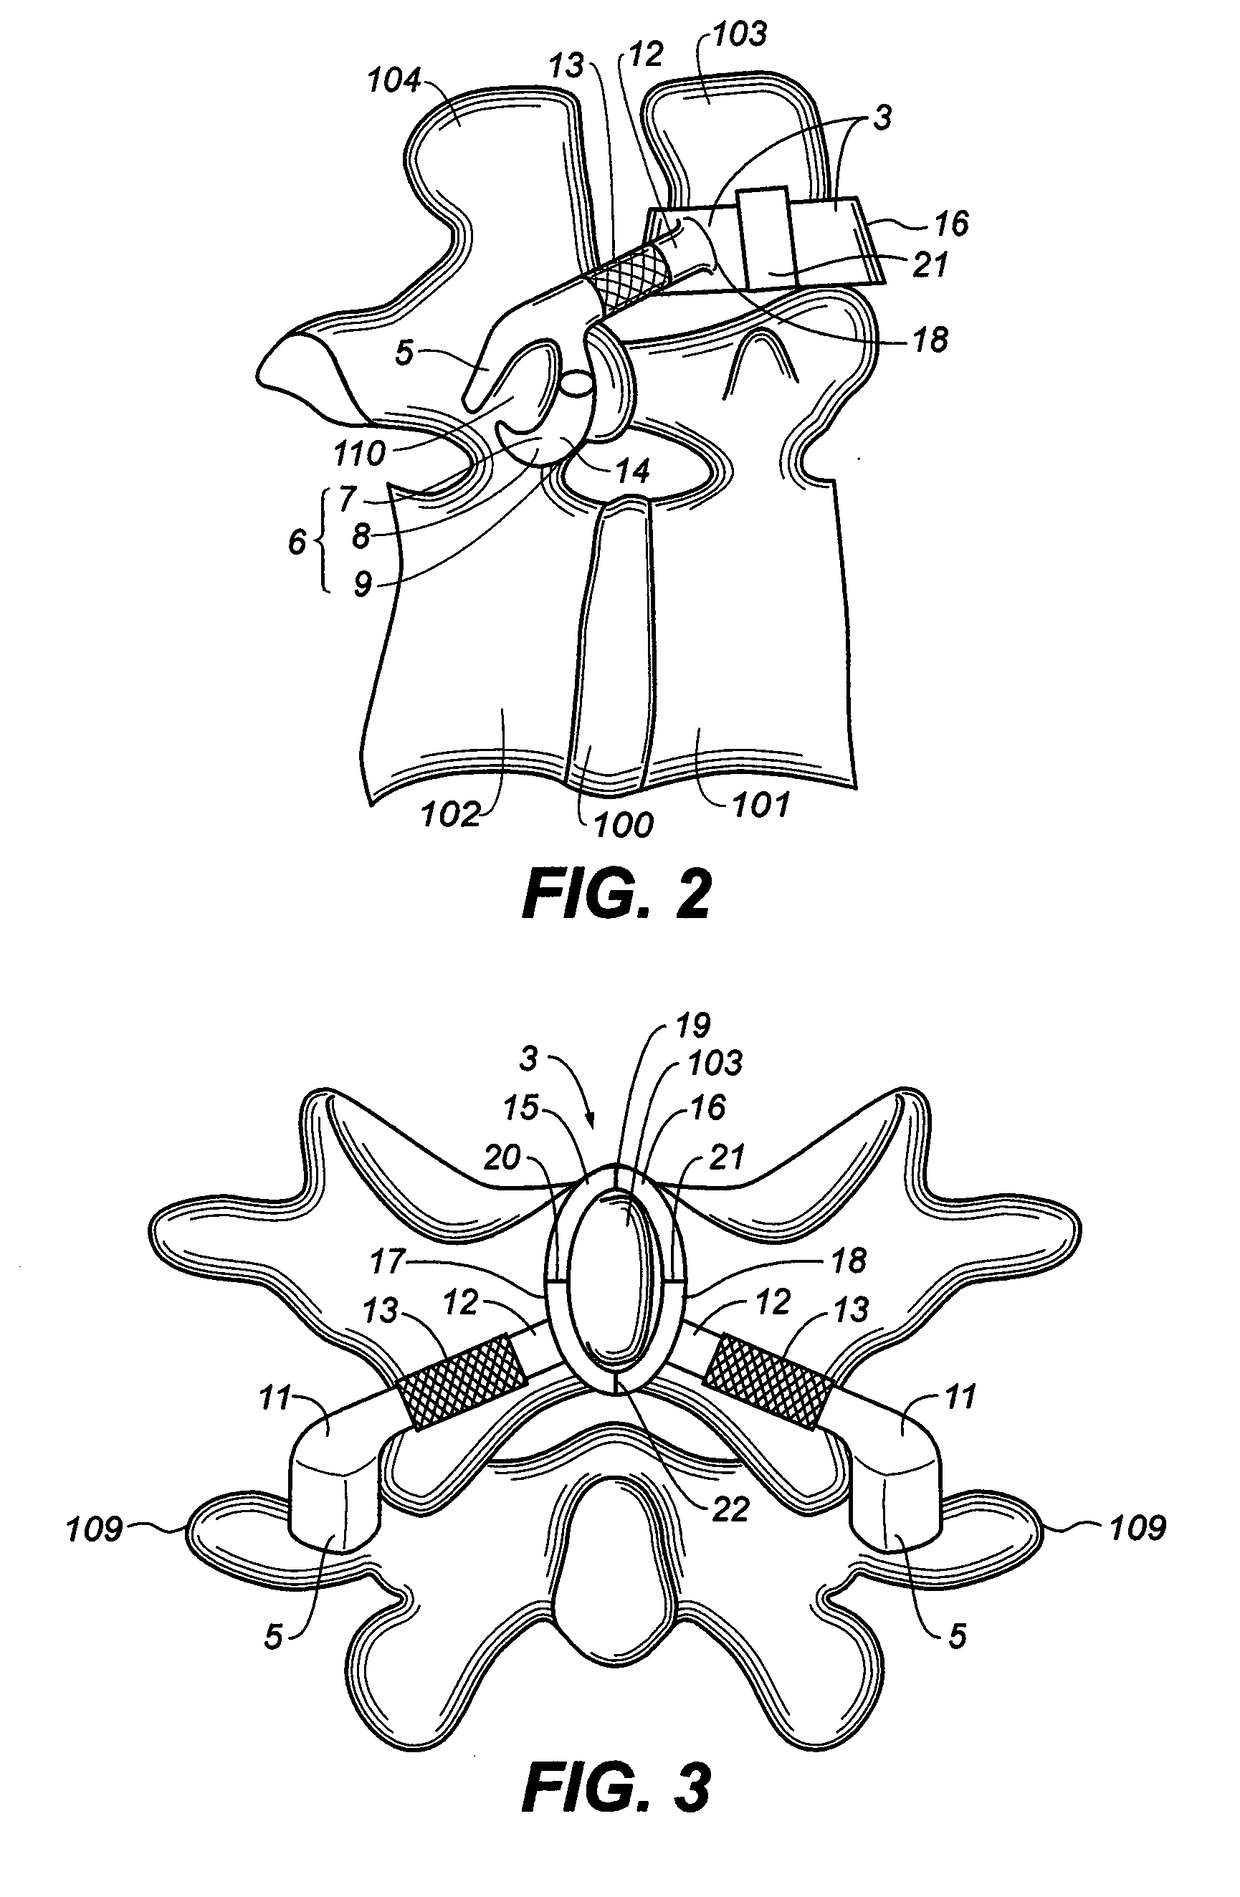 Spinal stabilization without implantation of hardware into the vertebrae proper or violation of cortical bone